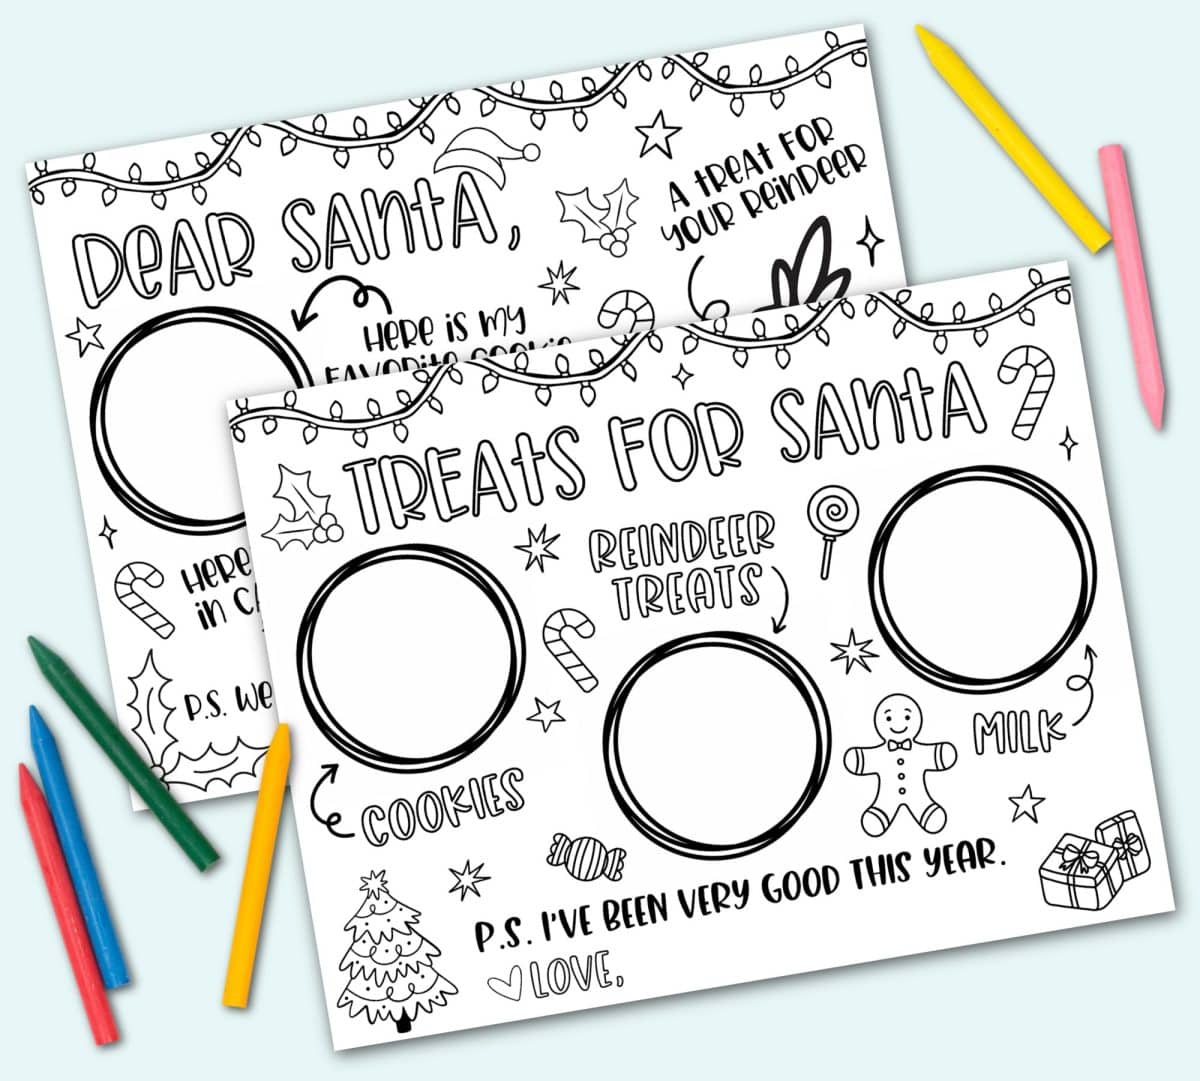 Milk and Cookies for Santa Placemats Free Printable